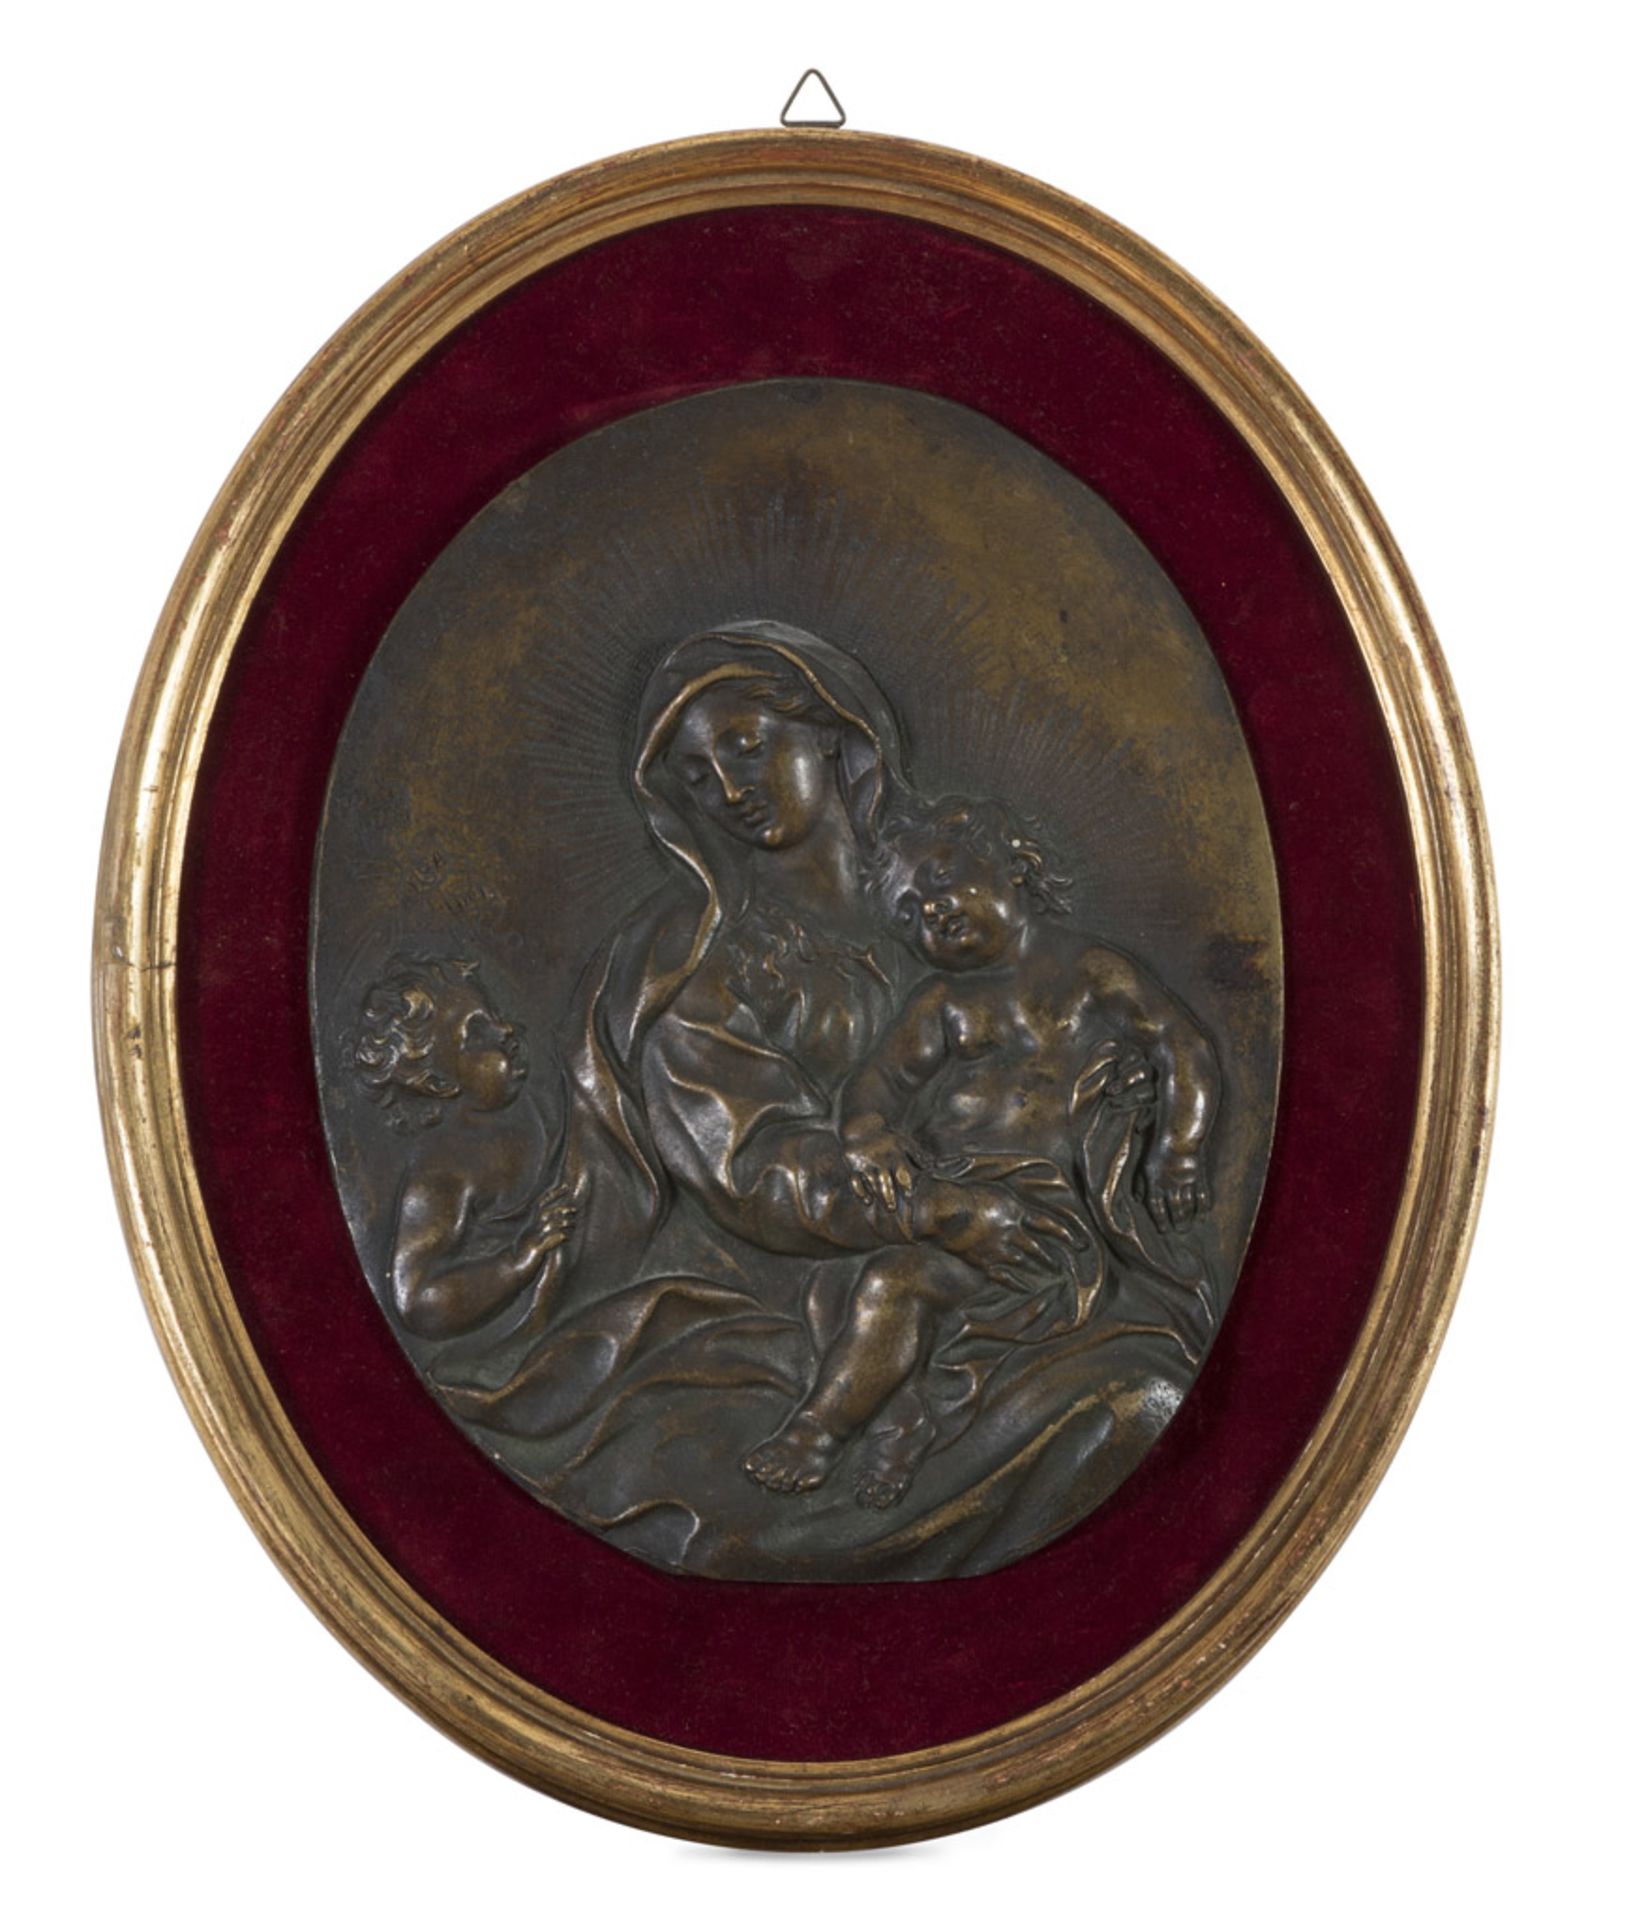 FILIPPO DELLA VALLE (Florence 1698 - Rome 1768) MADONNA WITH CHILD AND ST. JOHN INFANT Oval bronze